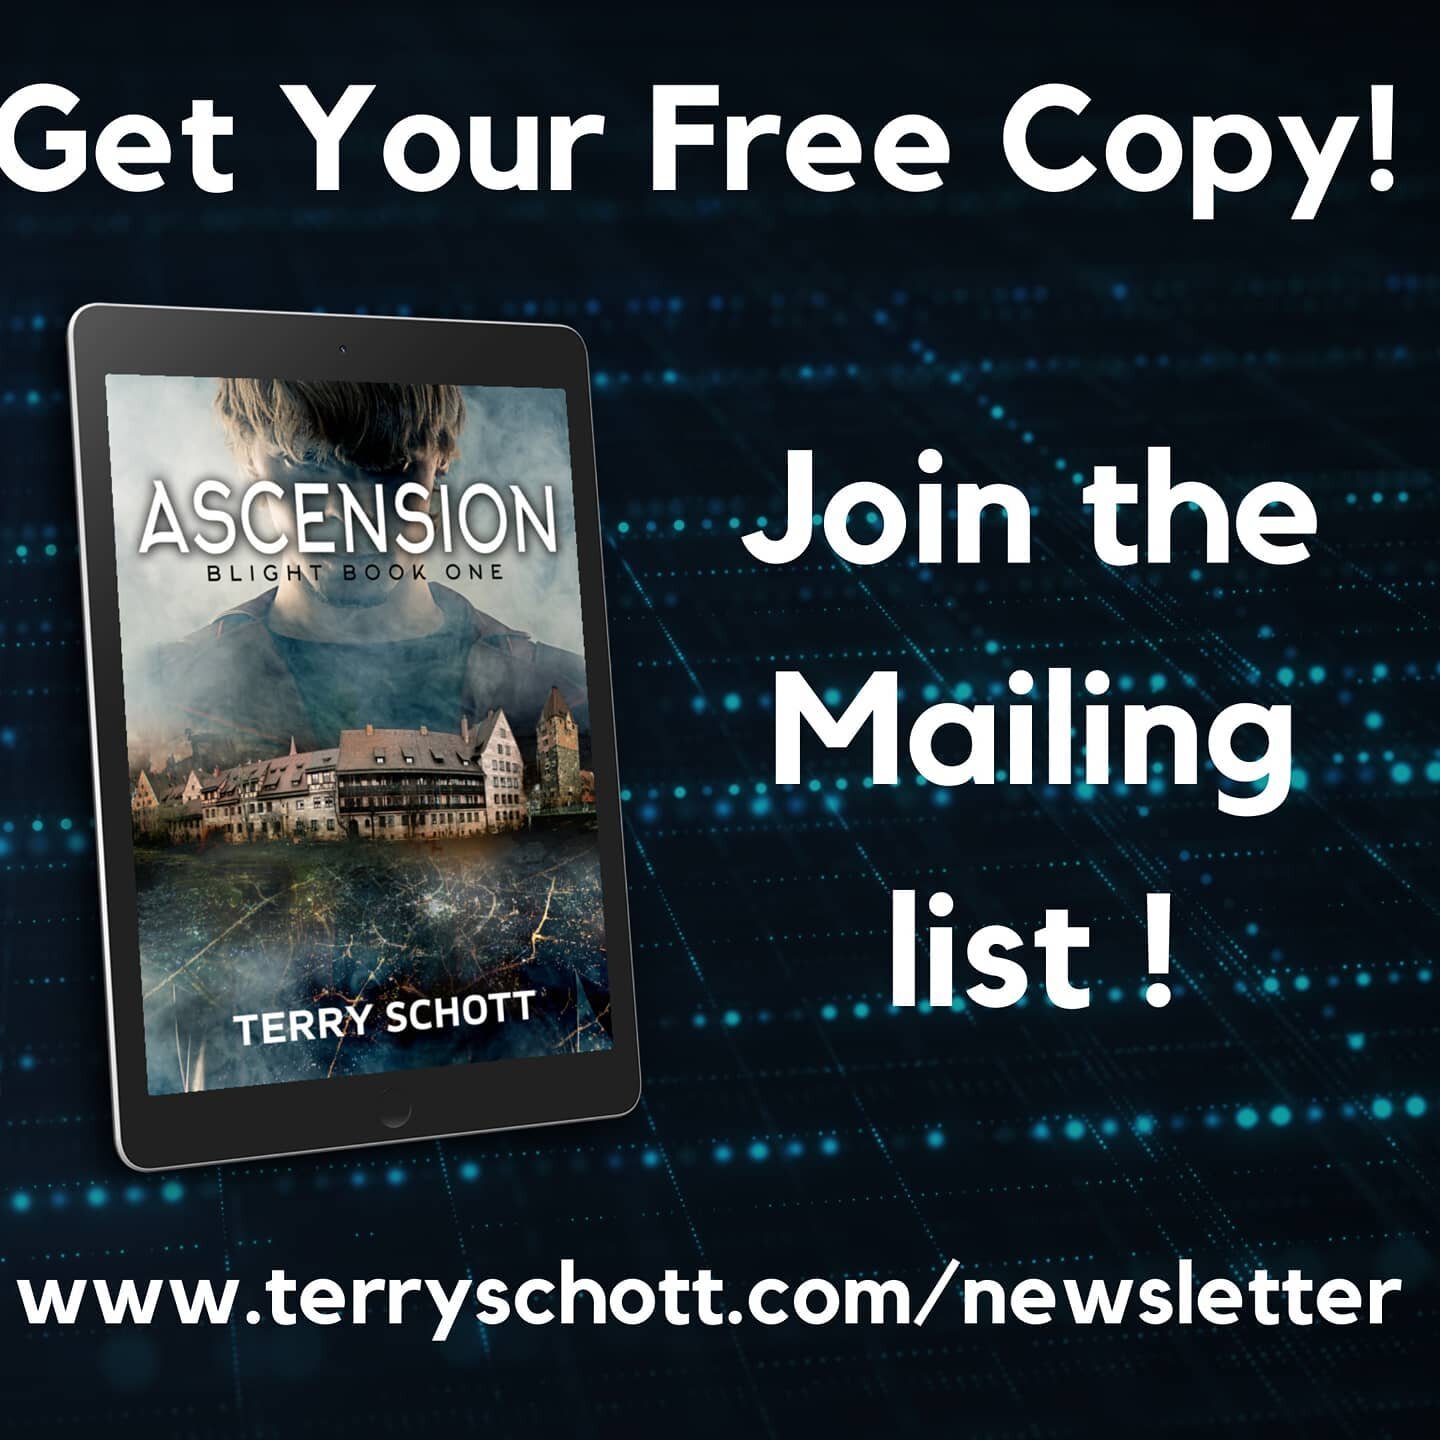 Want a free book!? Head over to terryschott.com/newsletter and sign up for my mailing list for a free copy of Acension! Book number 1 in the Blight Series!